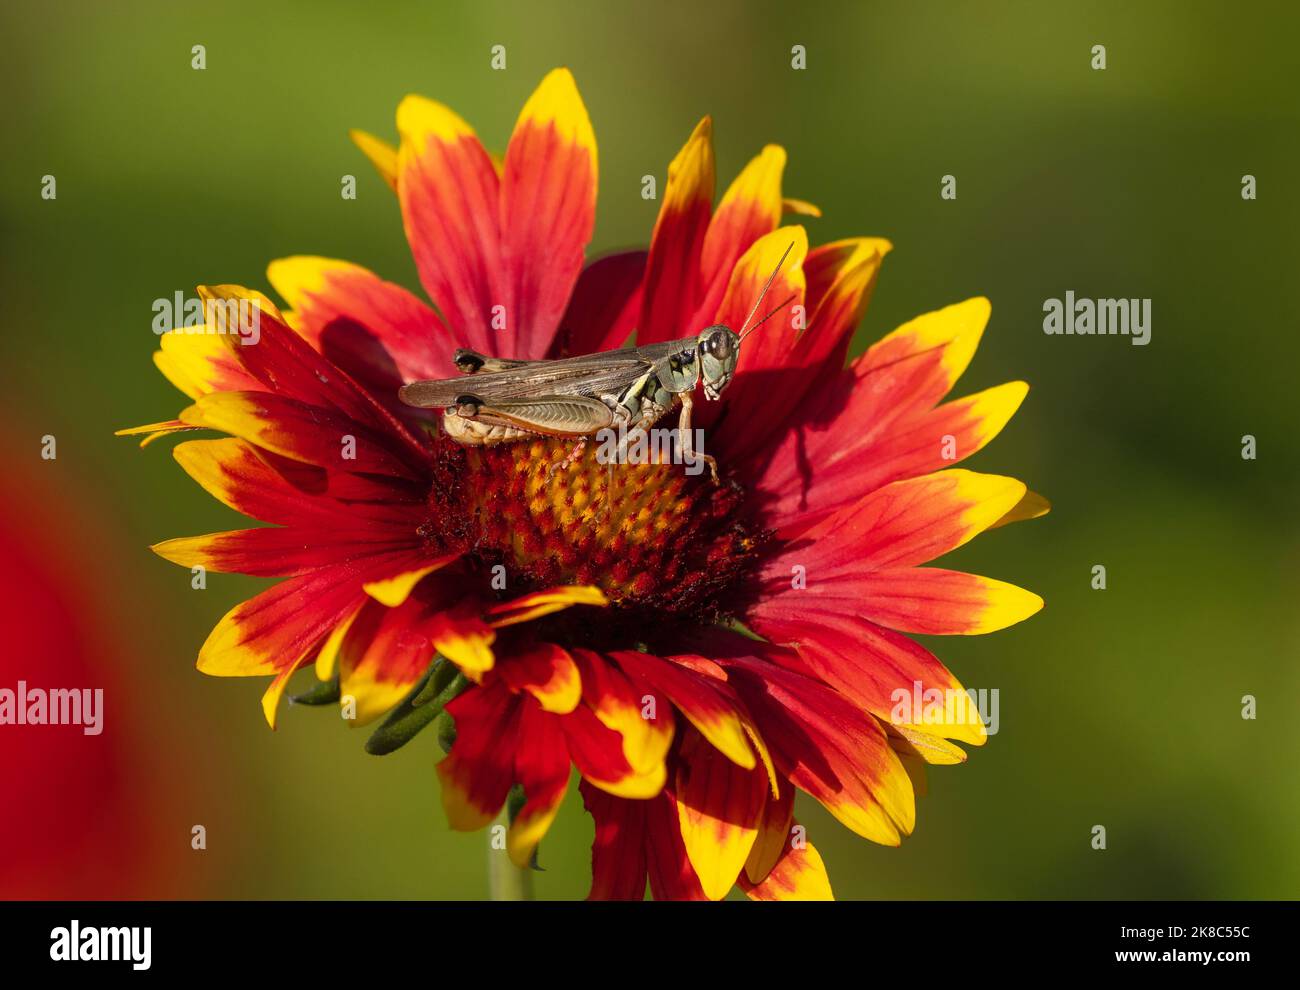 A Red-legged Grasshopper (Melanoplus) resting inside a Red and yellow flower (Gaillardia). Close up view. Stock Photo